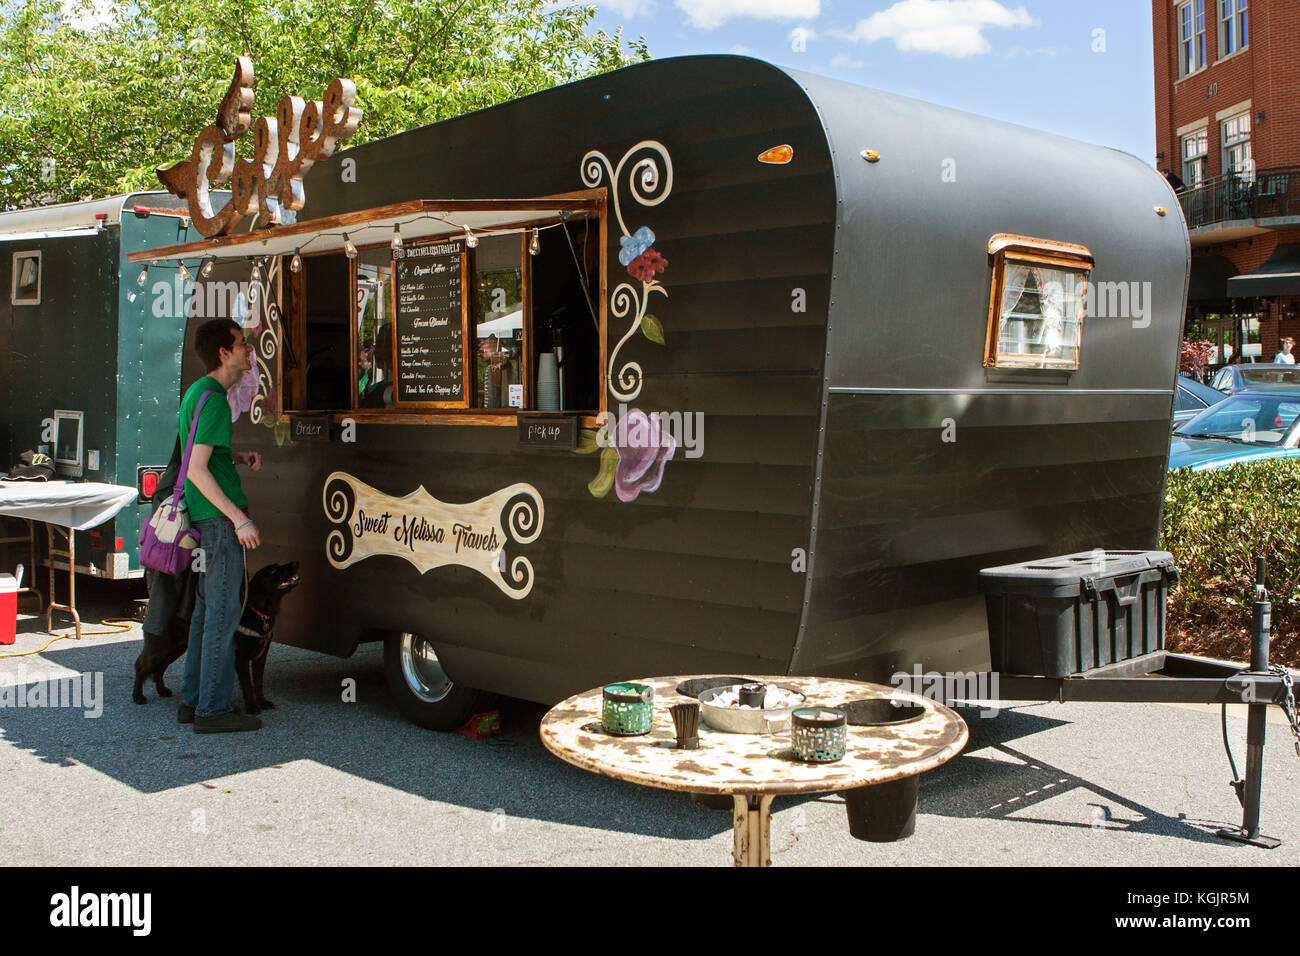 Suwanee, GA, USA - May 6, 2017:  A man orders coffee from a coffee-themed food truck at Woofstock, a dog festival at Suwanee Town Center. Stock Photo